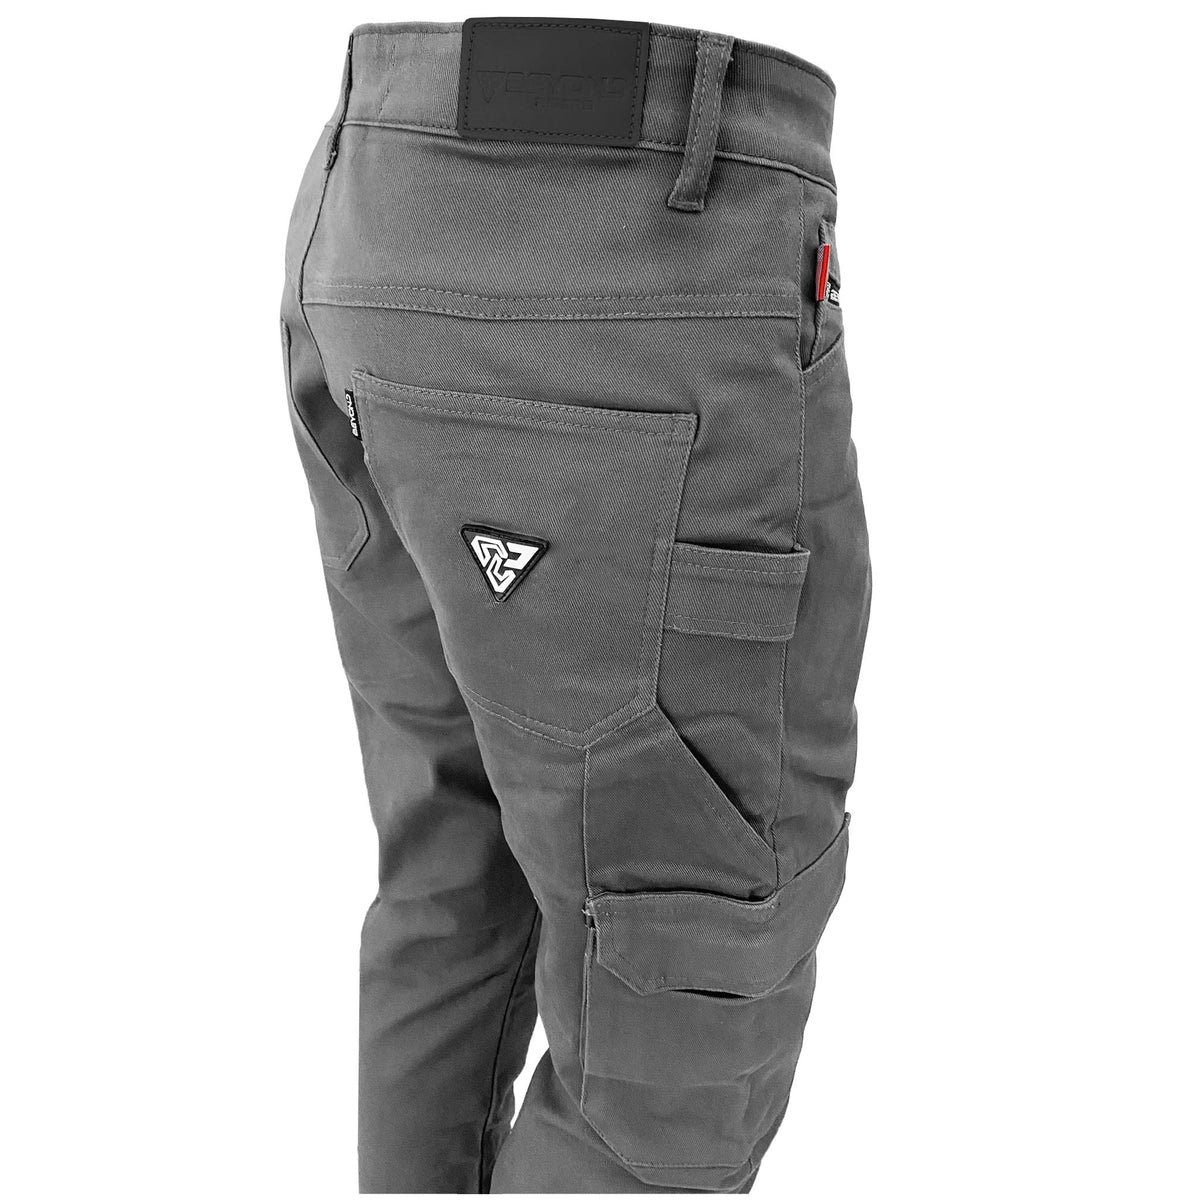 Loose Fit (wide) Protective Pants for Men – Beyond Riders